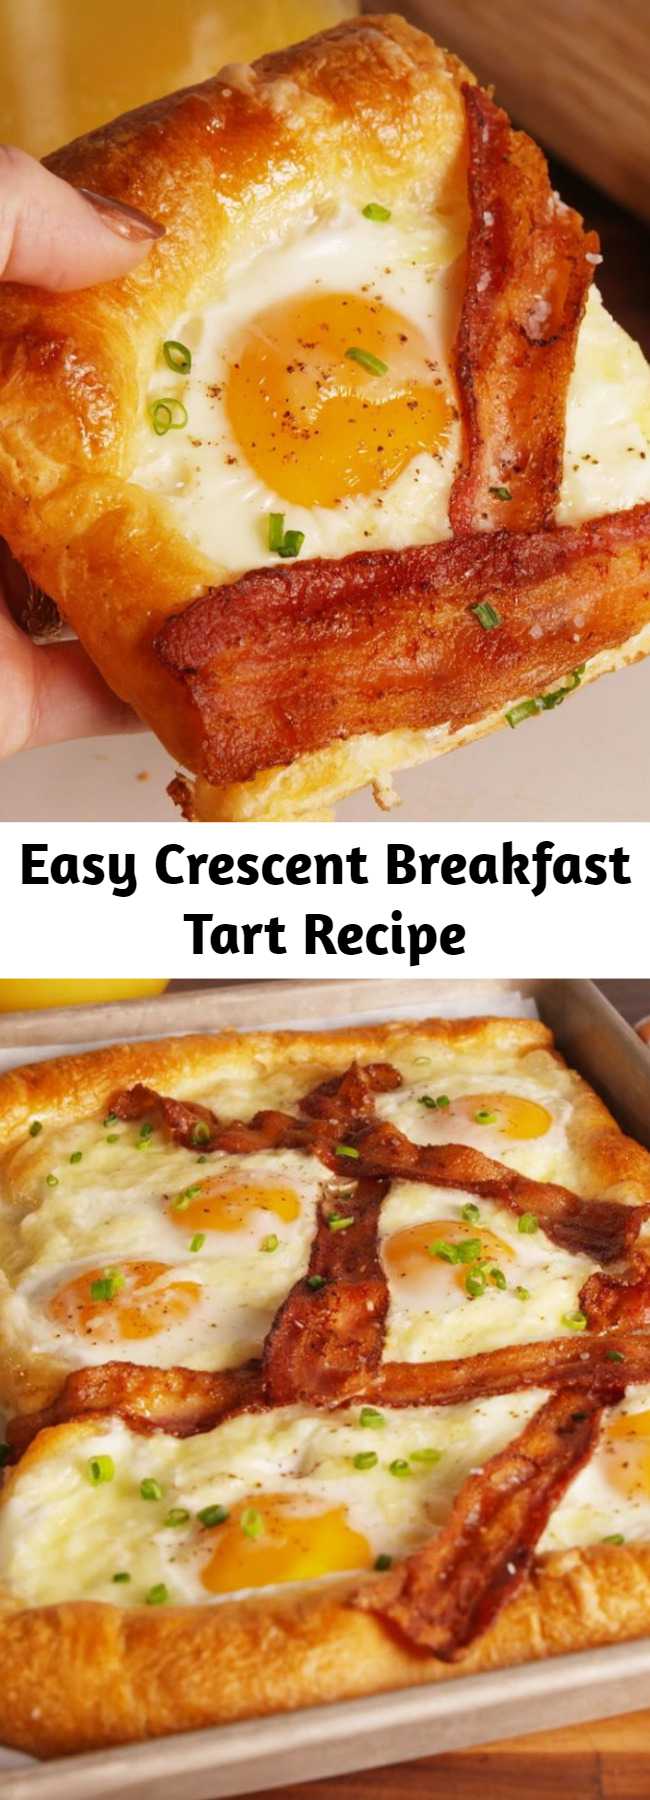 Easy Crescent Breakfast Tart Recipe - This Crescent Breakfast Tart is the EASIEST way to make breakfast for a crowd. As pretty as it is delicious!